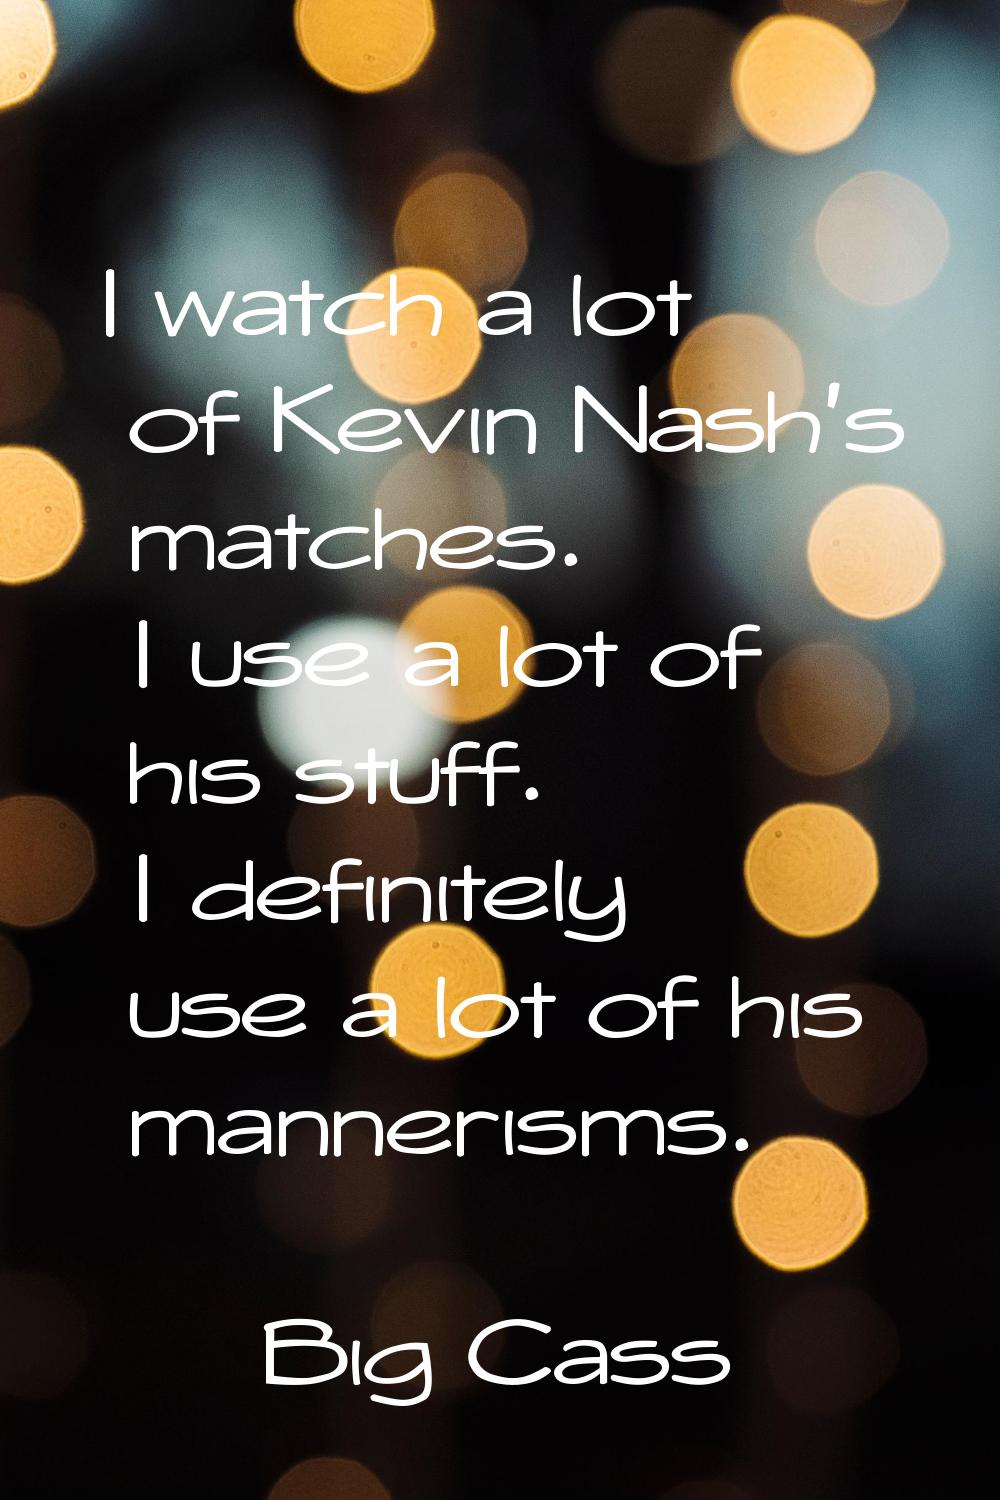 I watch a lot of Kevin Nash's matches. I use a lot of his stuff. I definitely use a lot of his mann